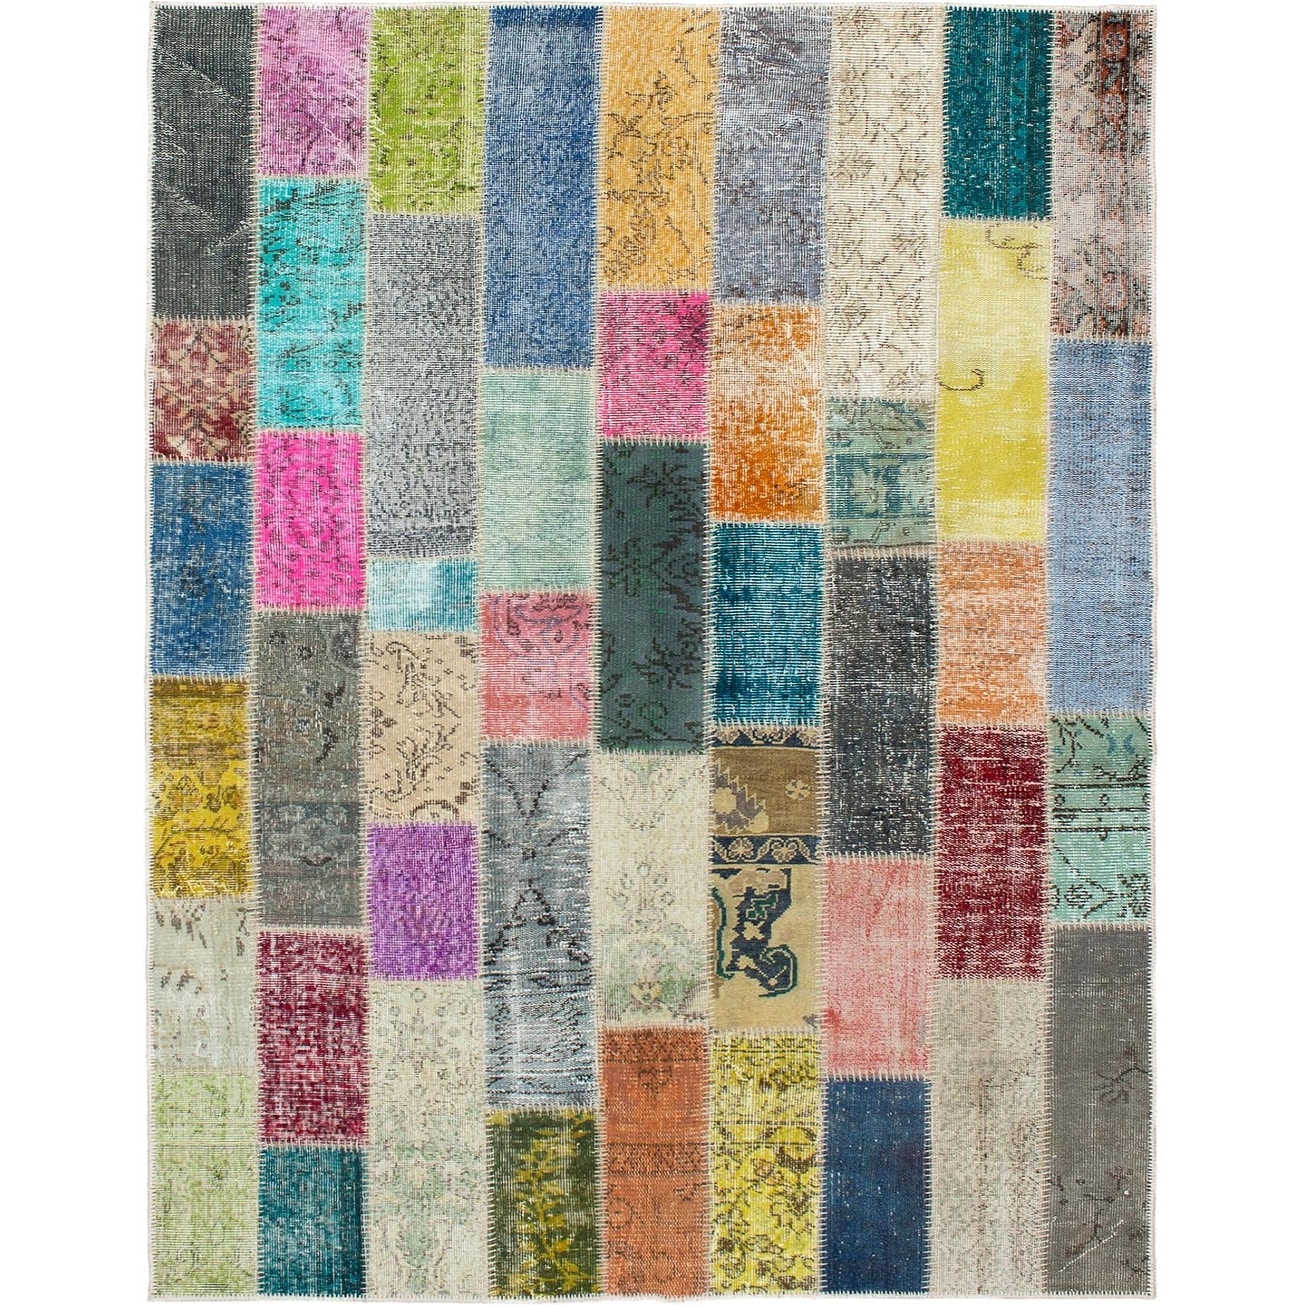 eCarpet Gallery Area Rug for Living Room Color Transition Patchwork Bohemian Multi Rug 5'7 x 7'9 288384 Hand-Knotted Wool Rug Bedroom